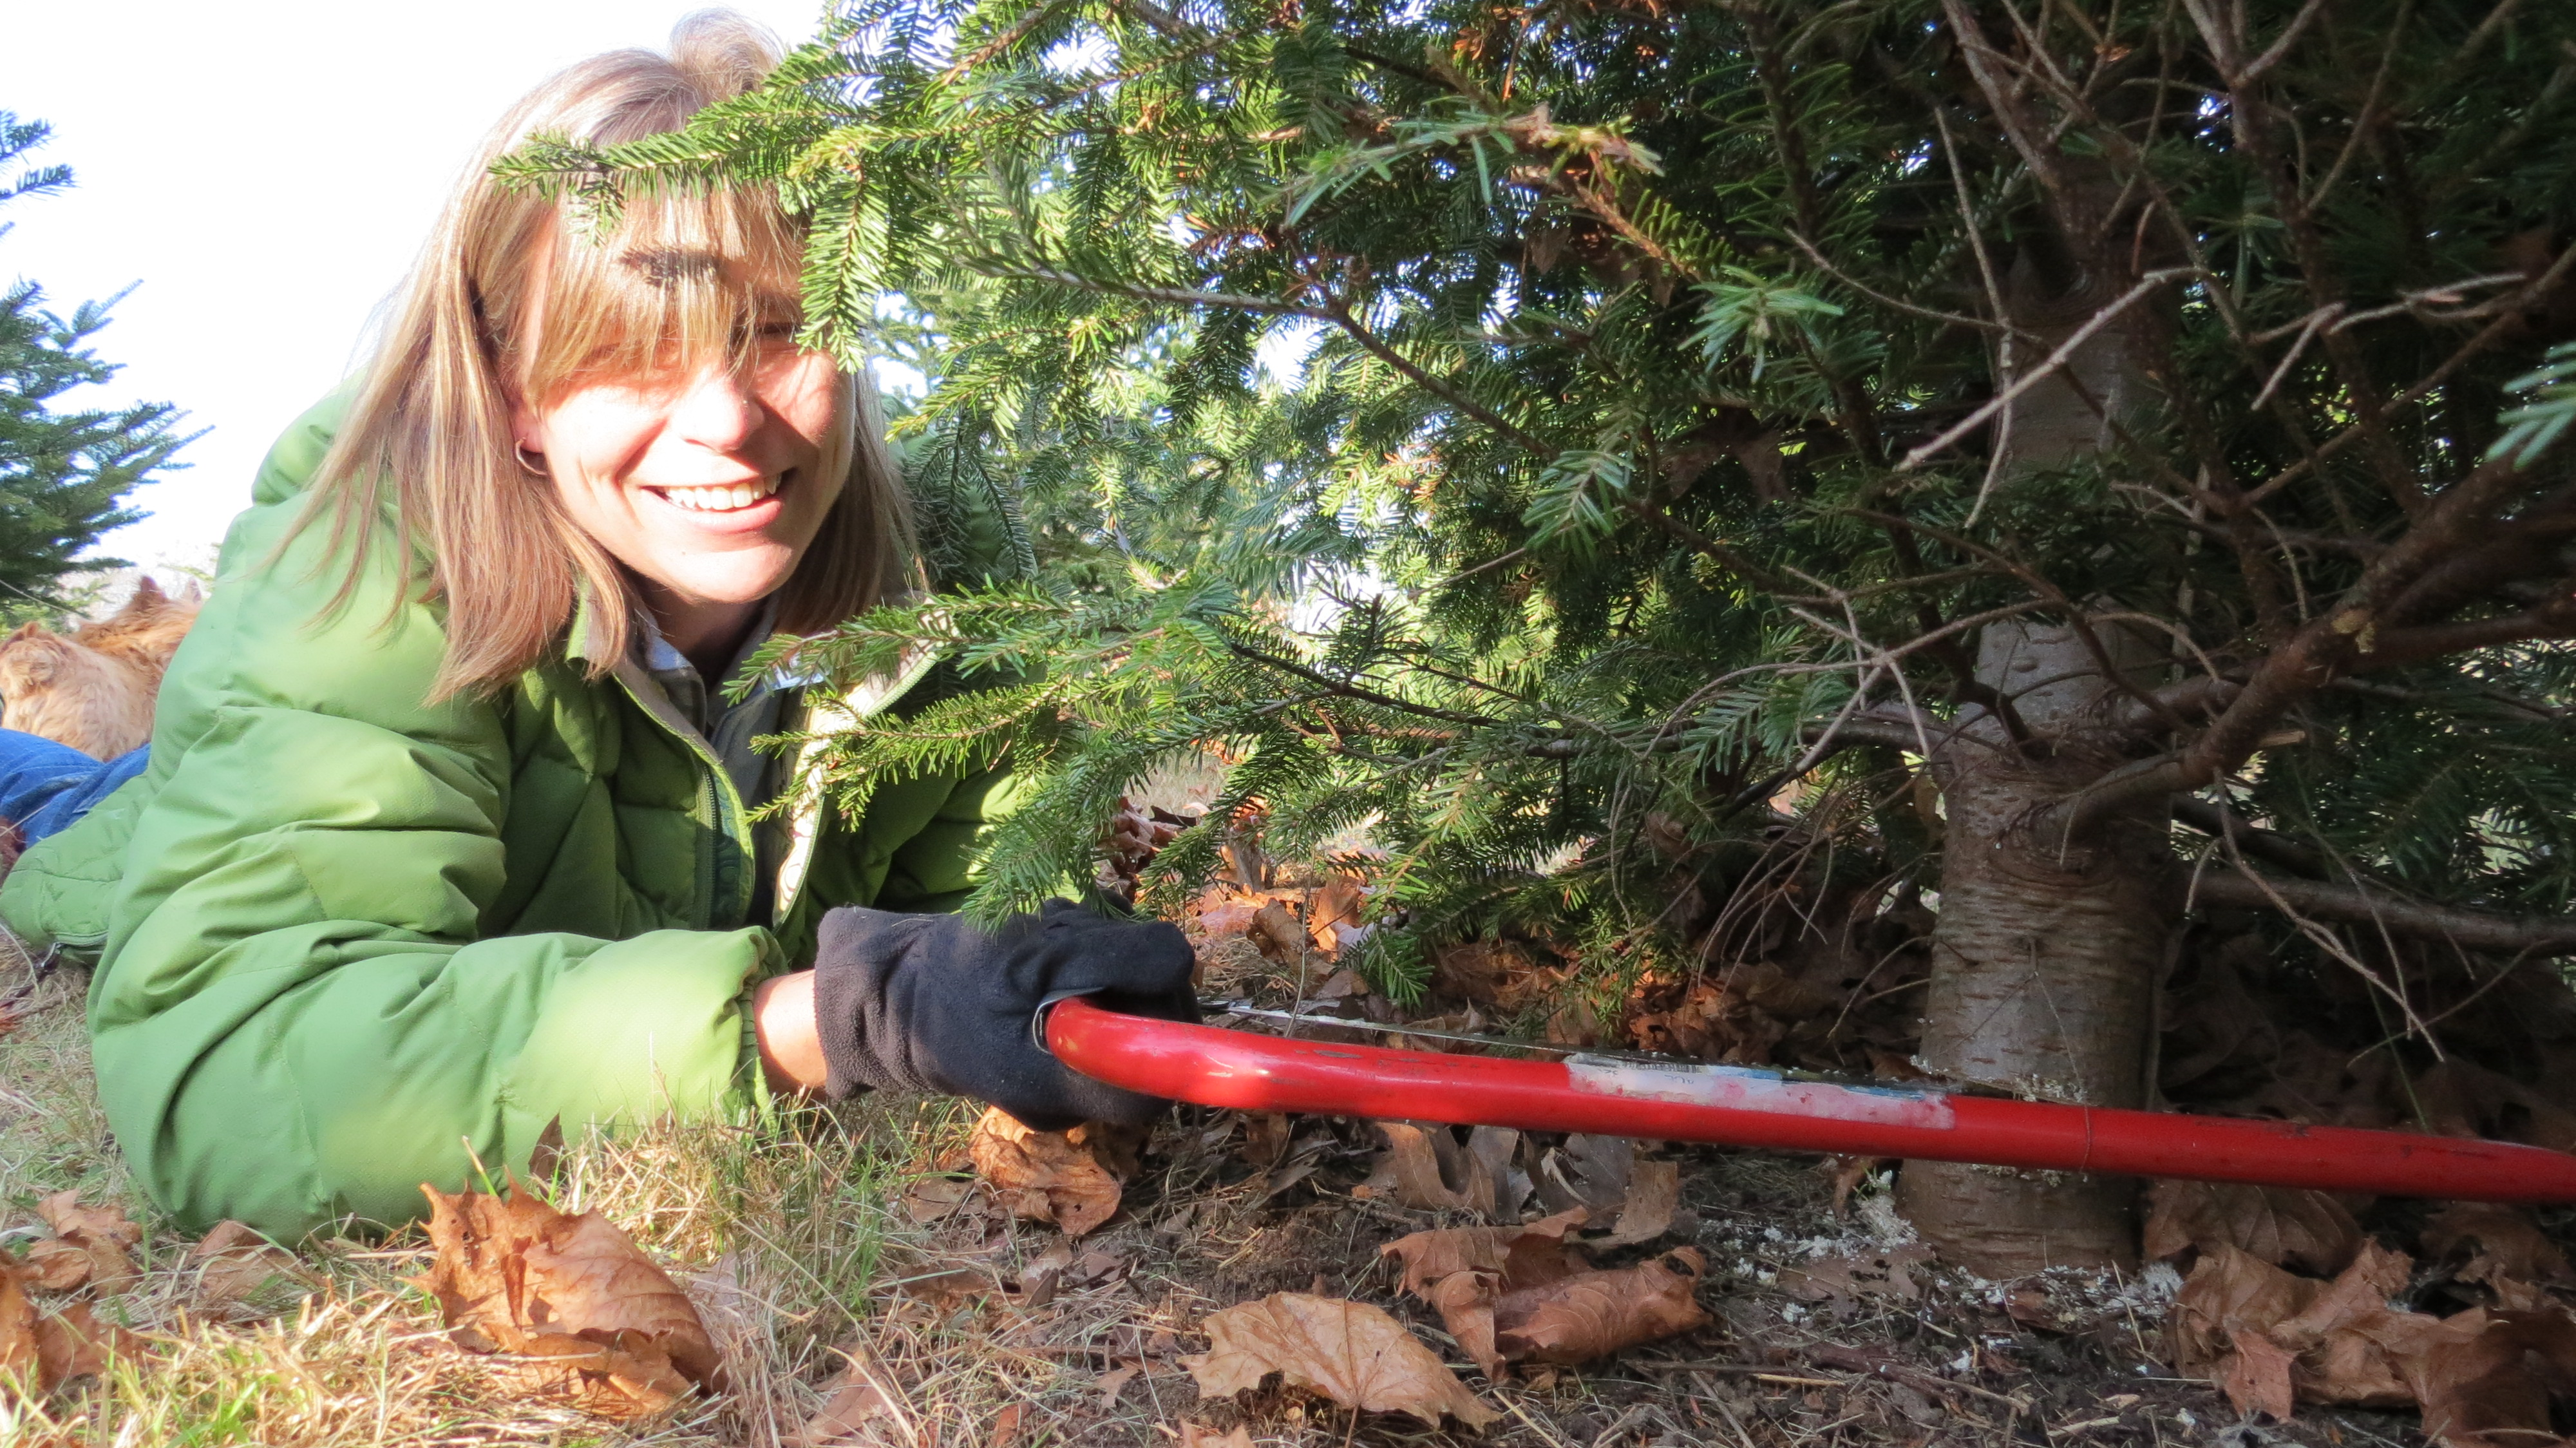 Where to cut your own Christmas tree on Cape Cod!